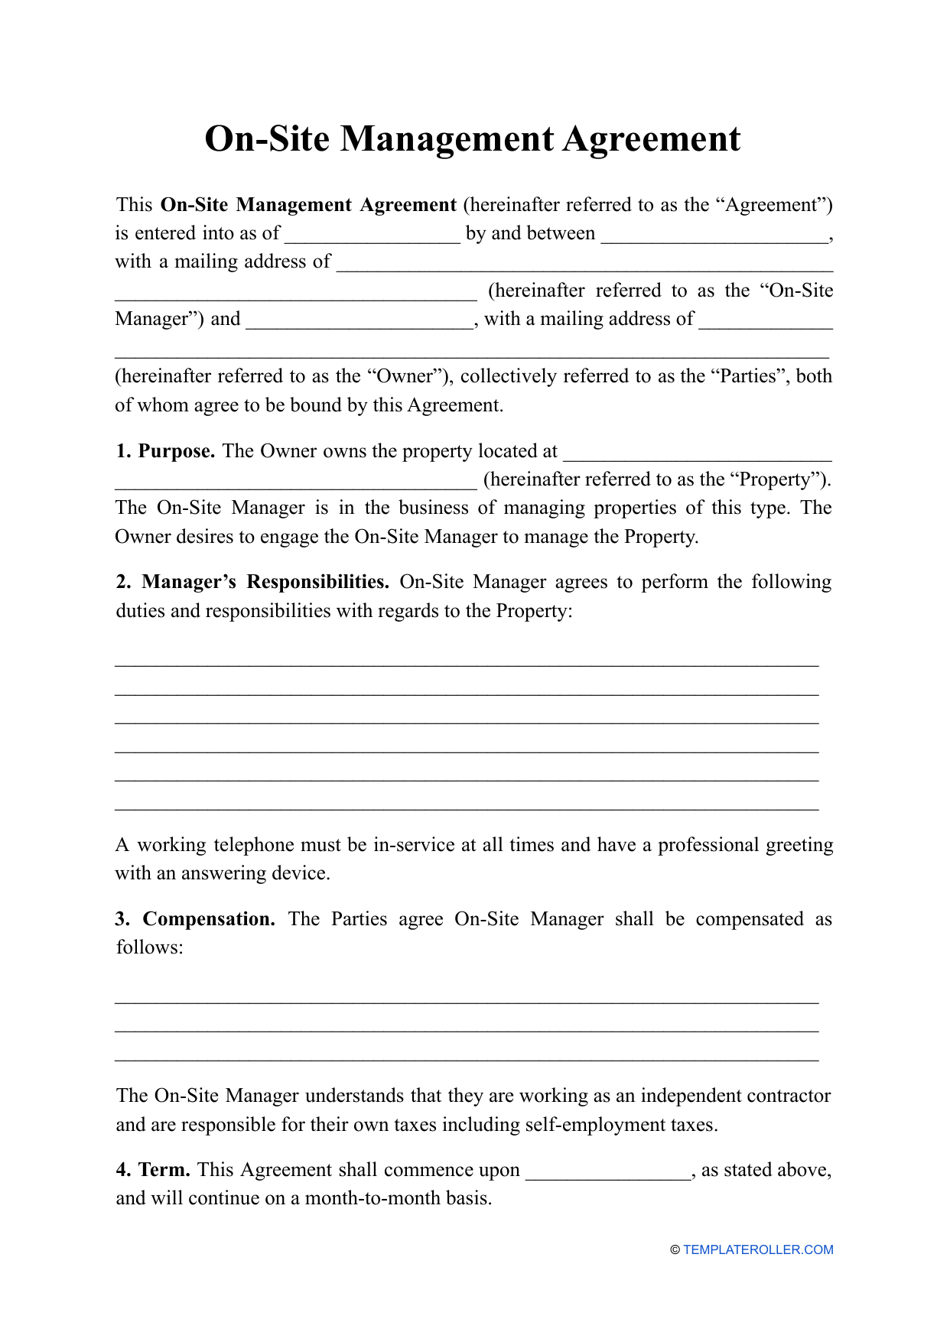 On-Site Management Agreement Template Download Printable PDF Pertaining To free commercial property management agreement template